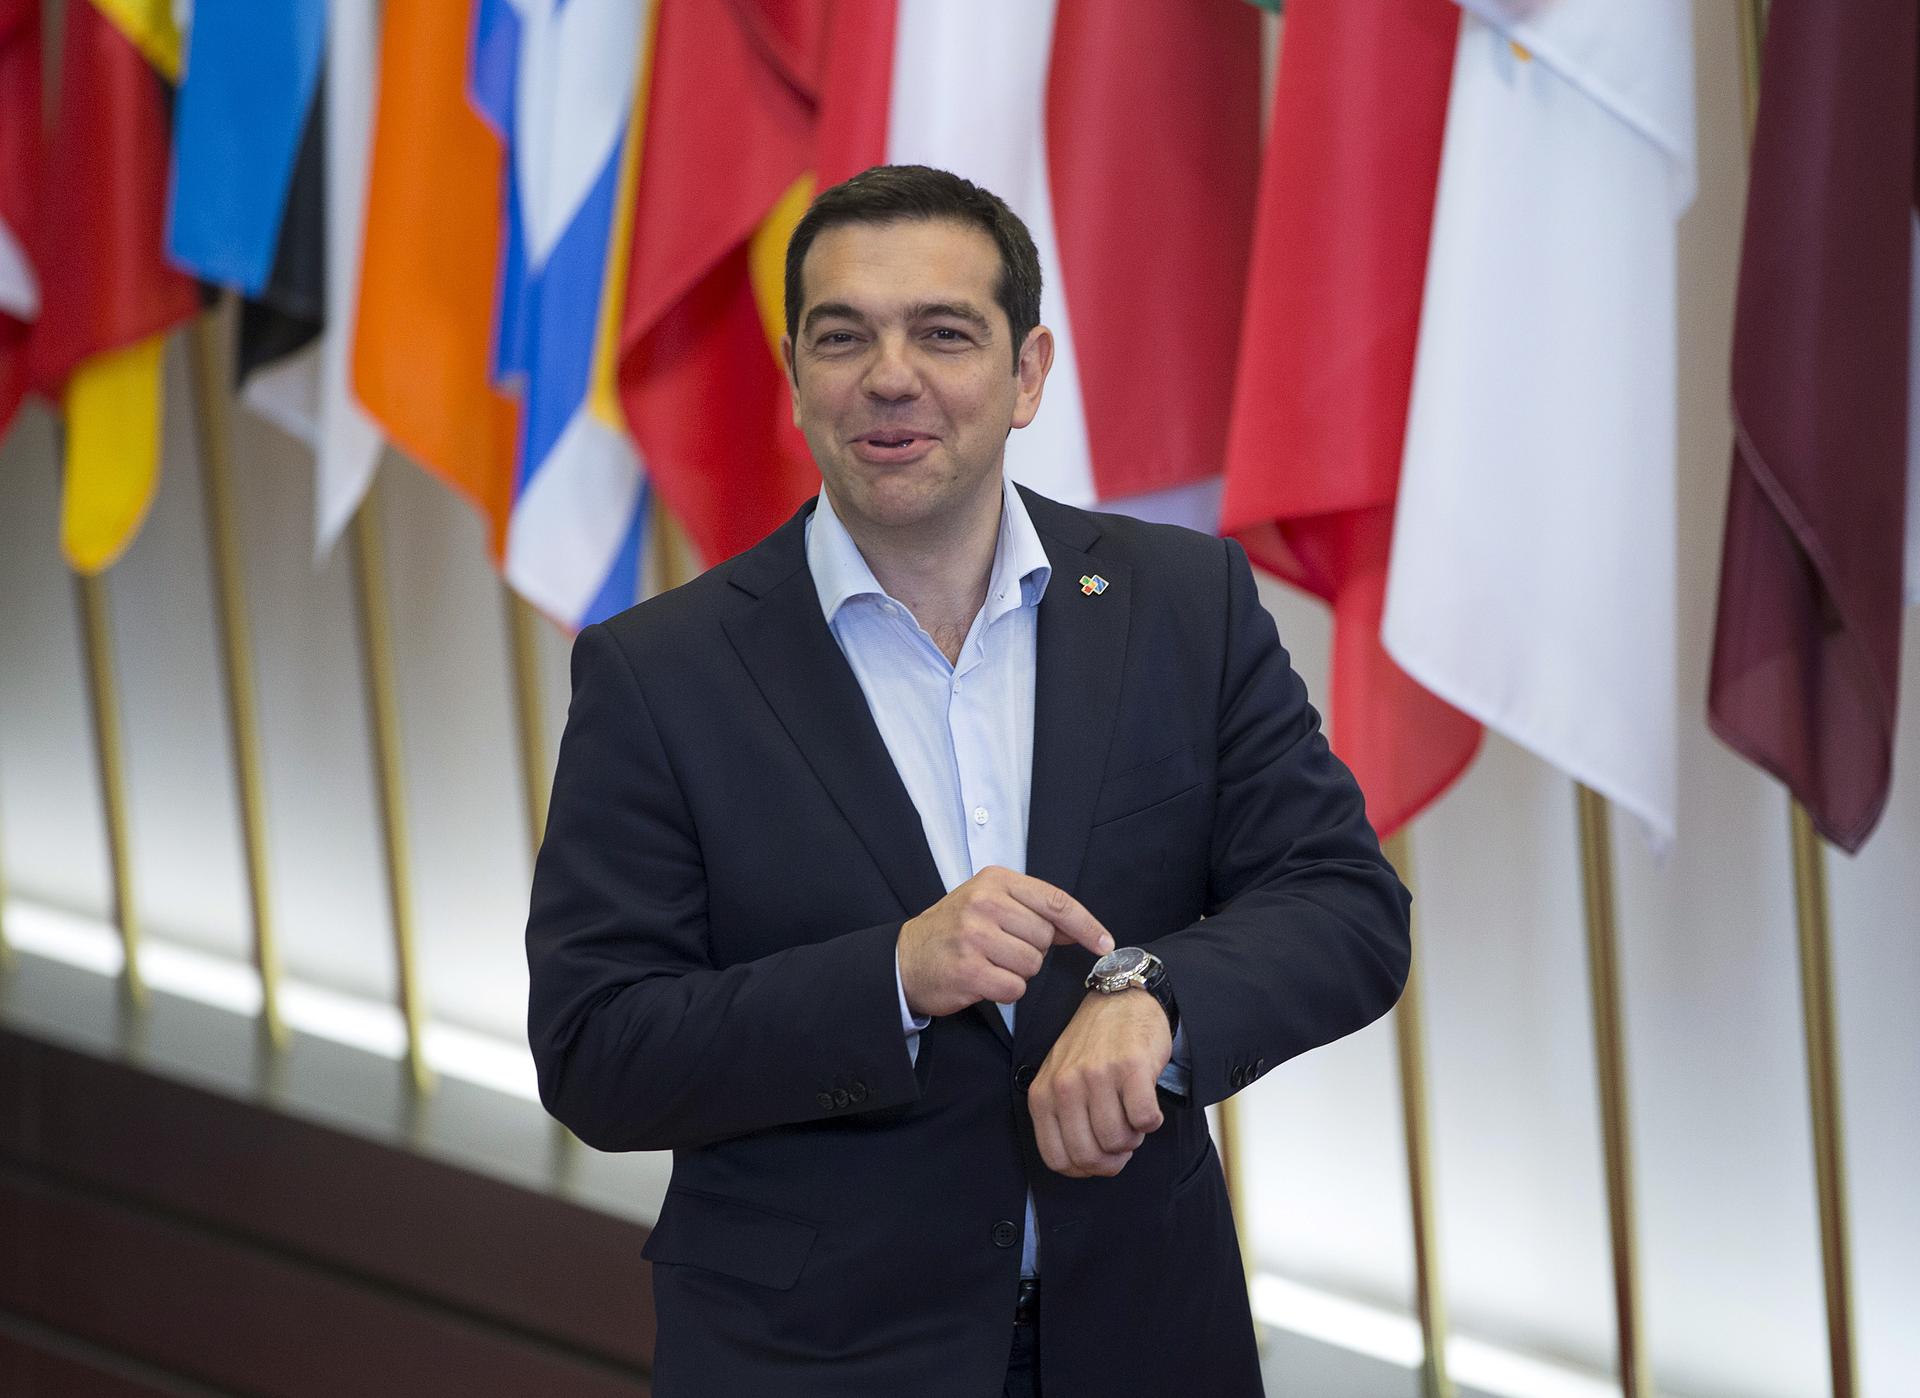 Greek Prime Minister Alexis Tsipras shows his watch while leaving the European Council headquarters on the first day of an EU-CELAC Latin America summit in Brussels, Belgium June 11, 2015.